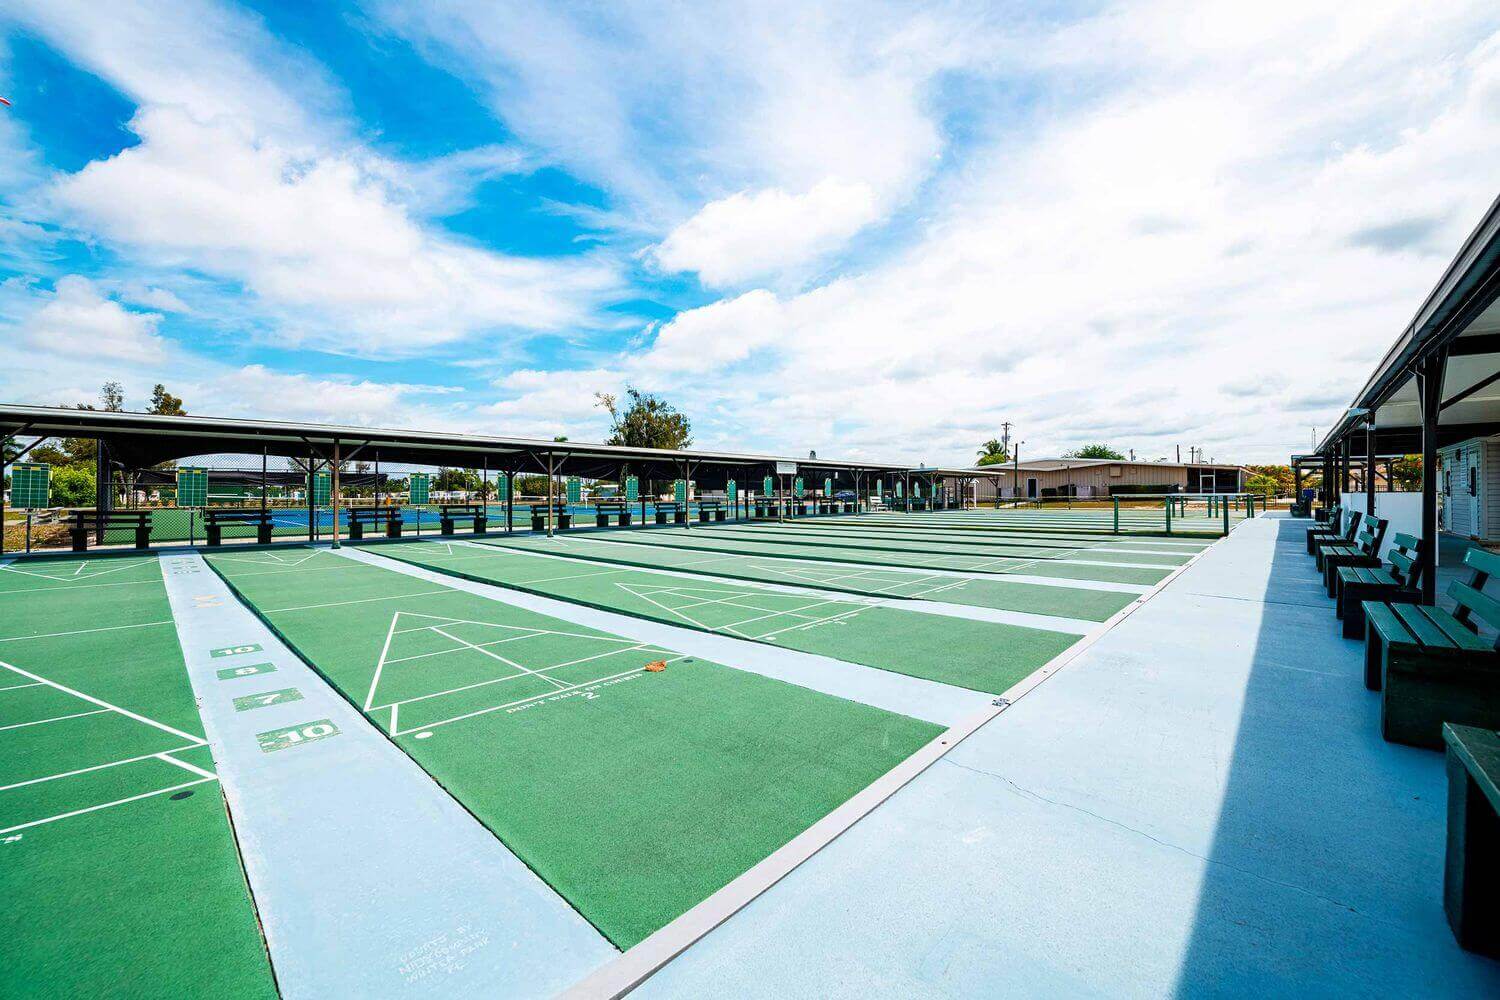 Shuffleboard courts with benches nearby at Bonita Terra community